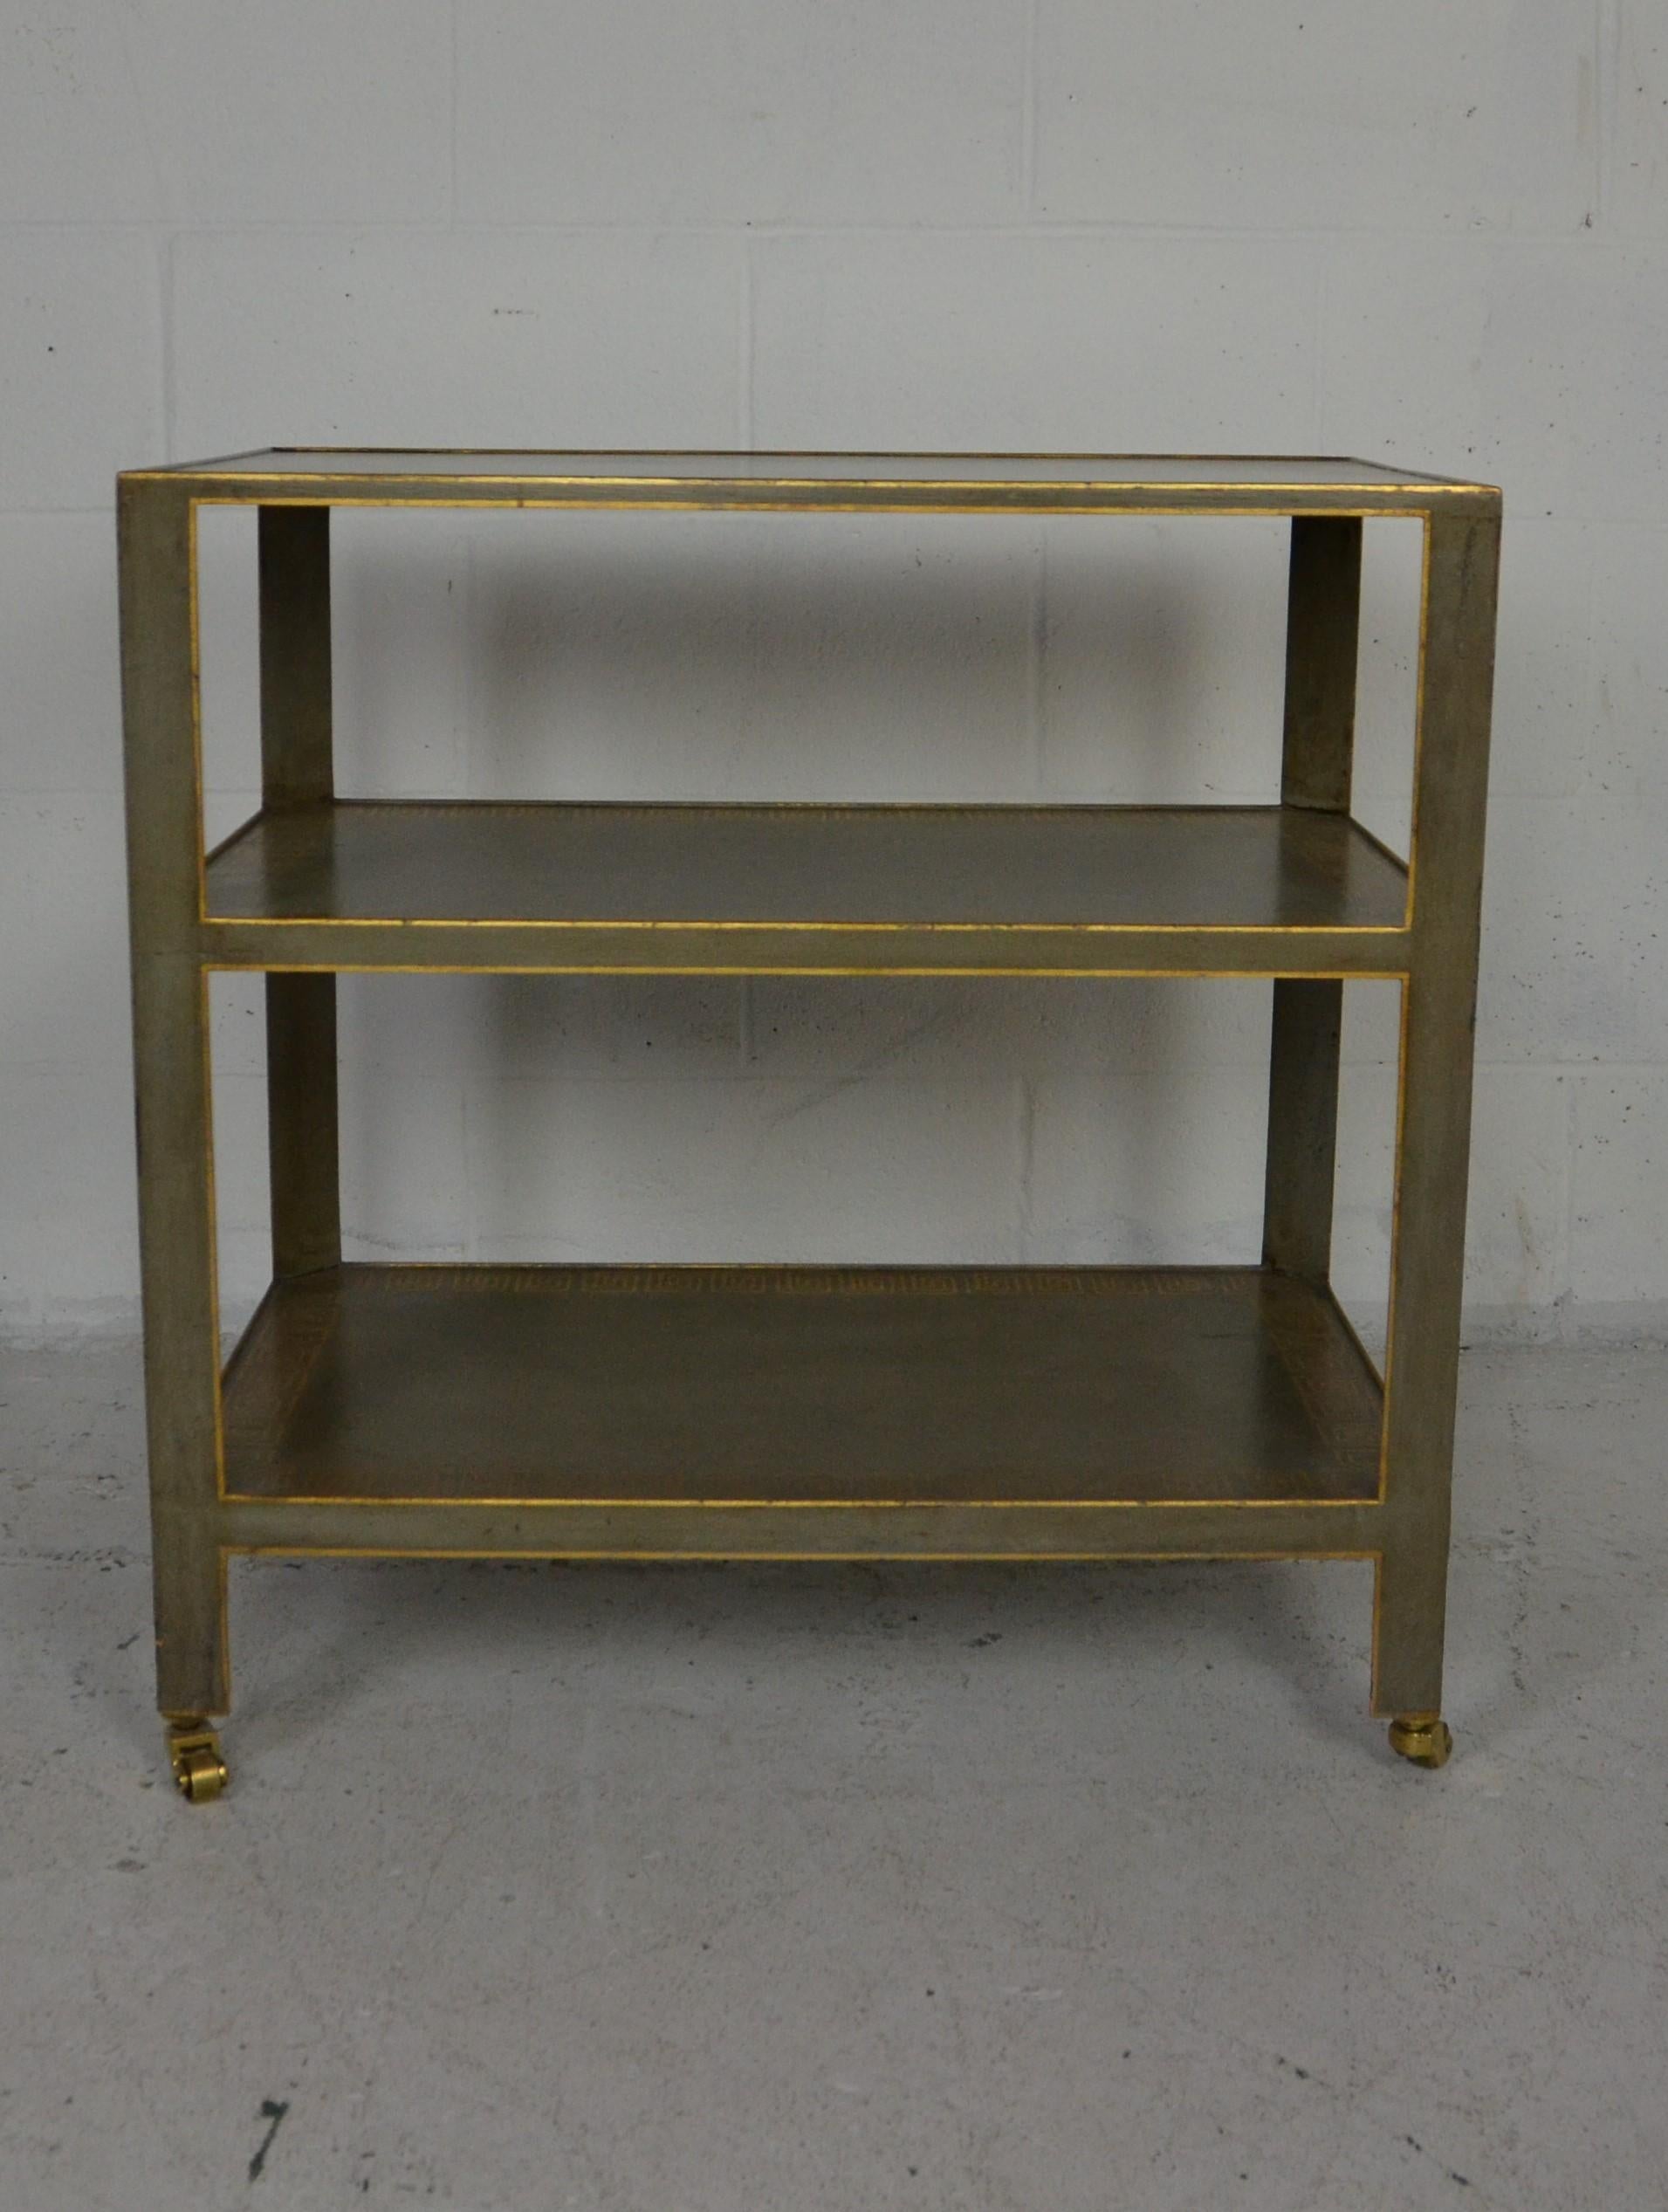 A 3 tier Venetian style tea cart. Original gray/teal paint finish decorated with a hand painted design in the classical Greek style. Gold pin-striping to the edges. Solid brass castors.